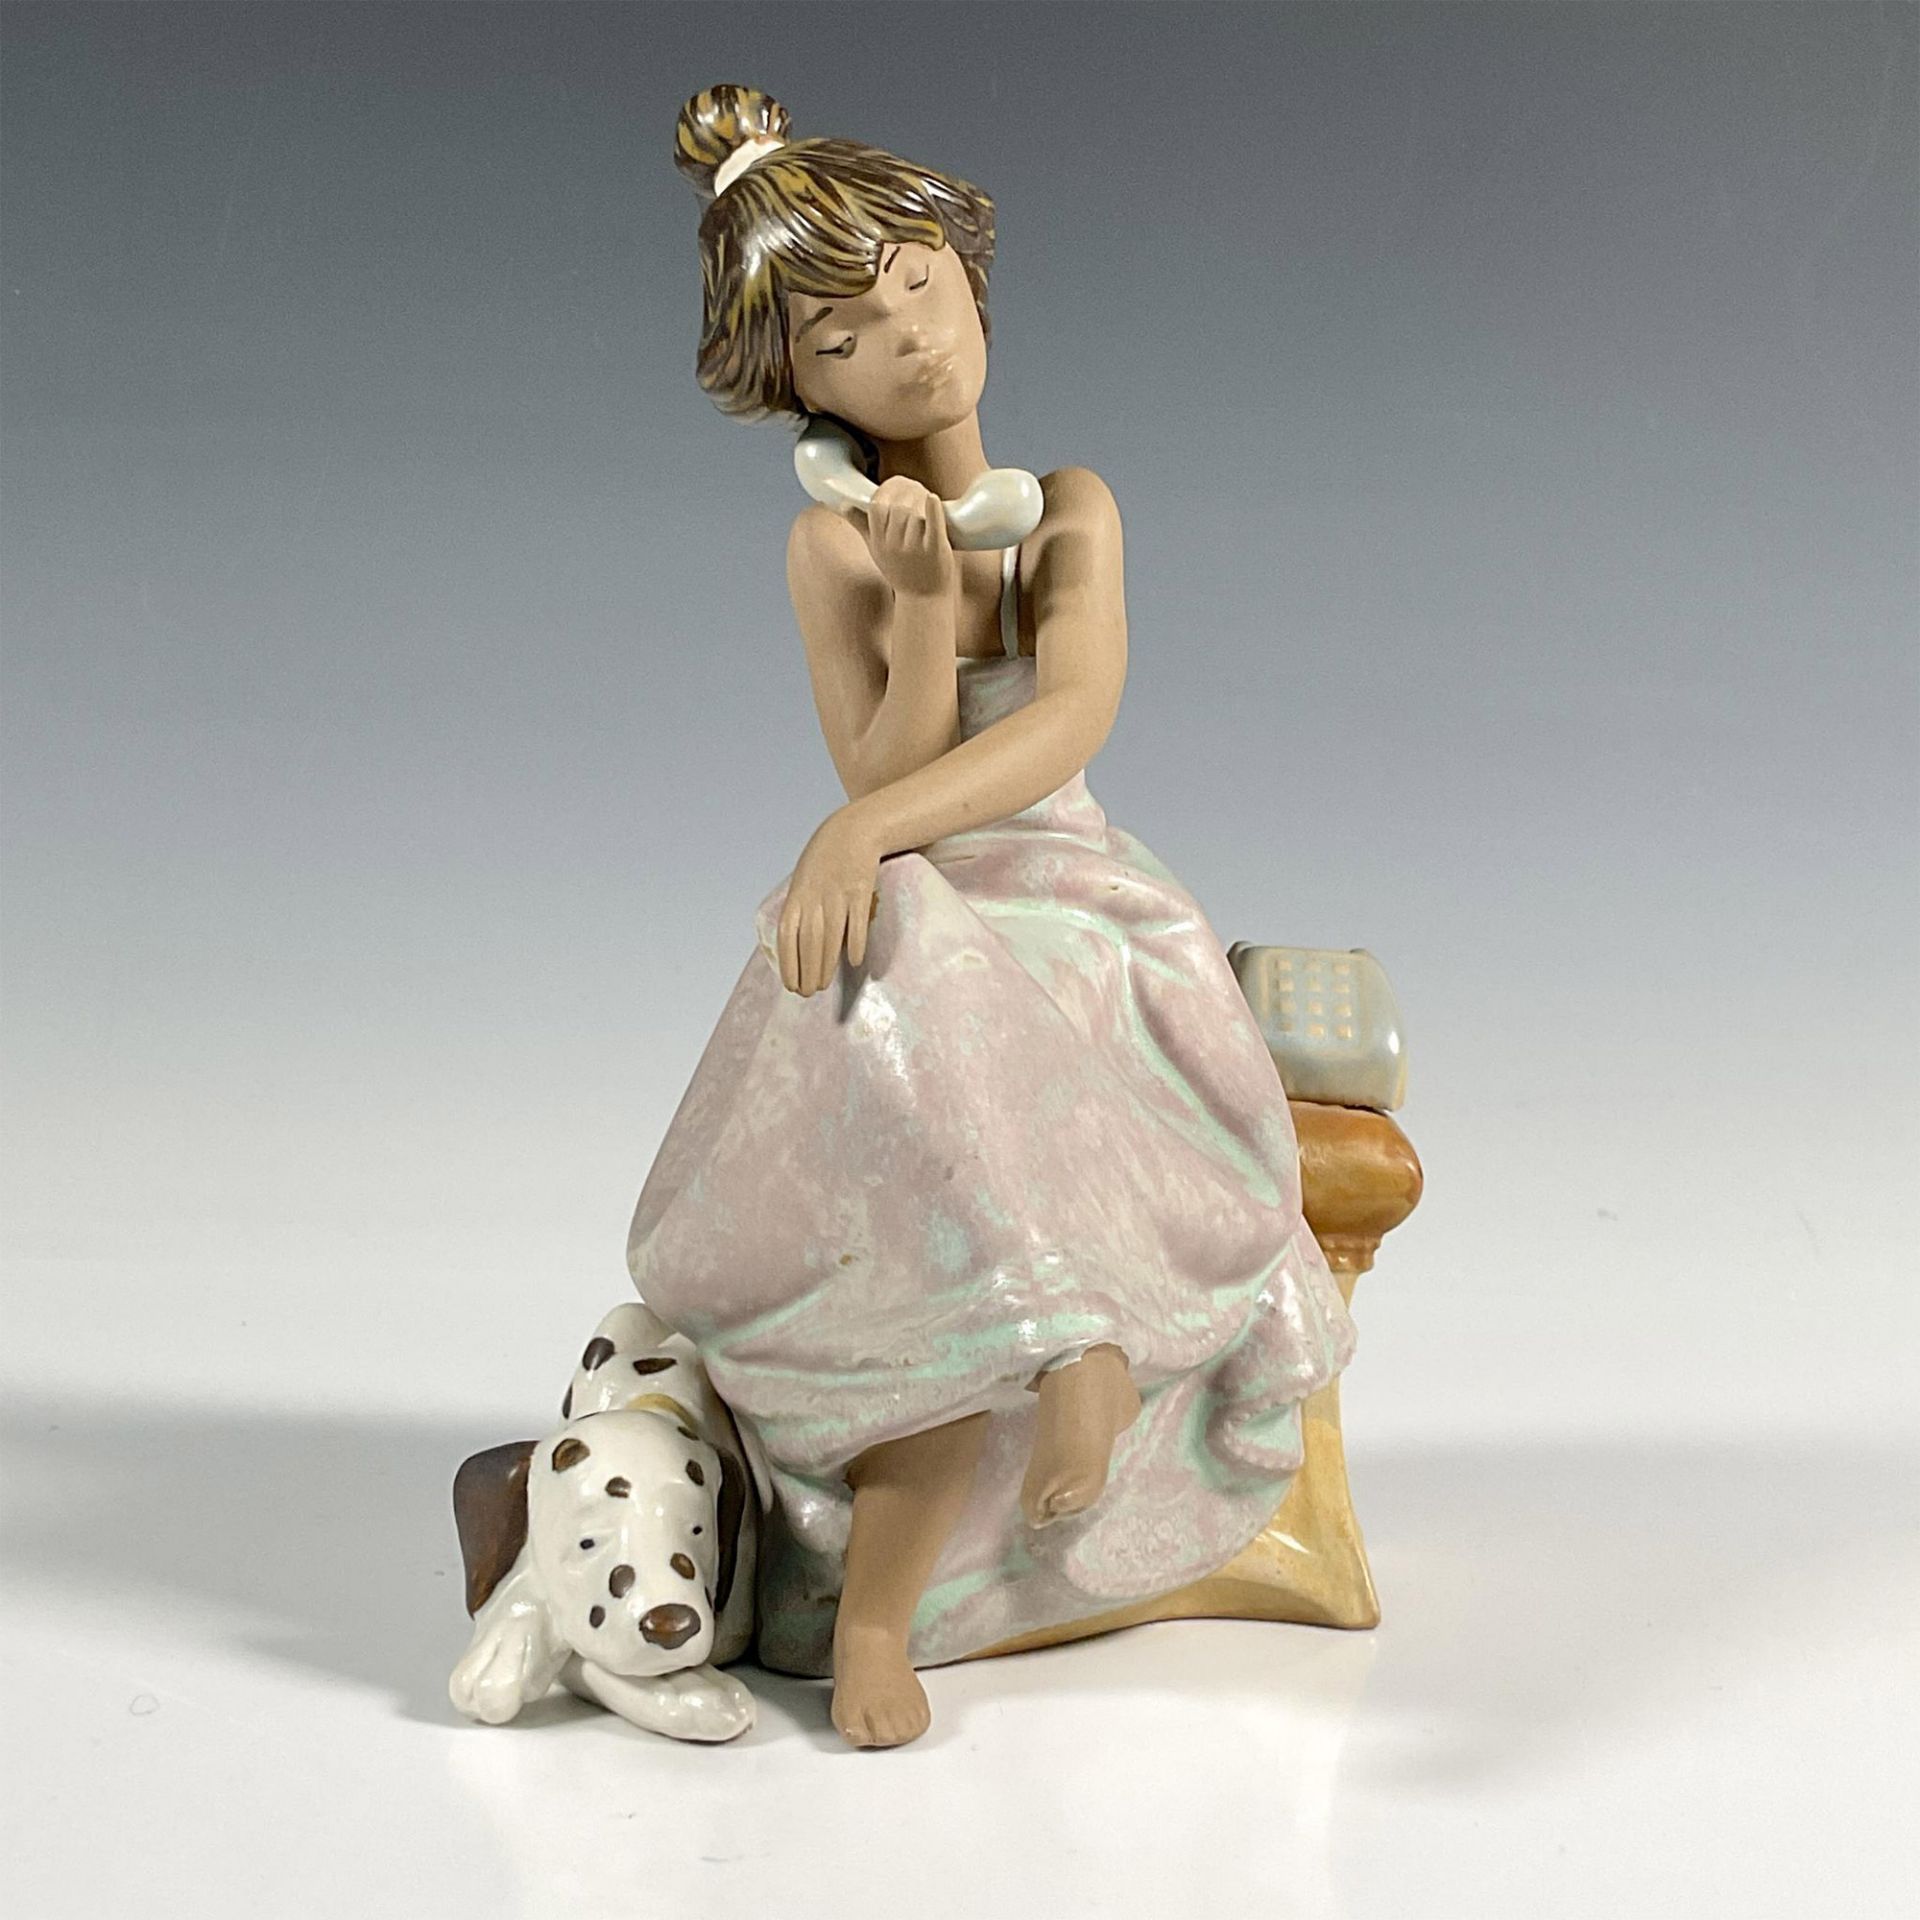 Chit Chat 1015466 - Lladro Porcelain Figurine - Image 2 of 8